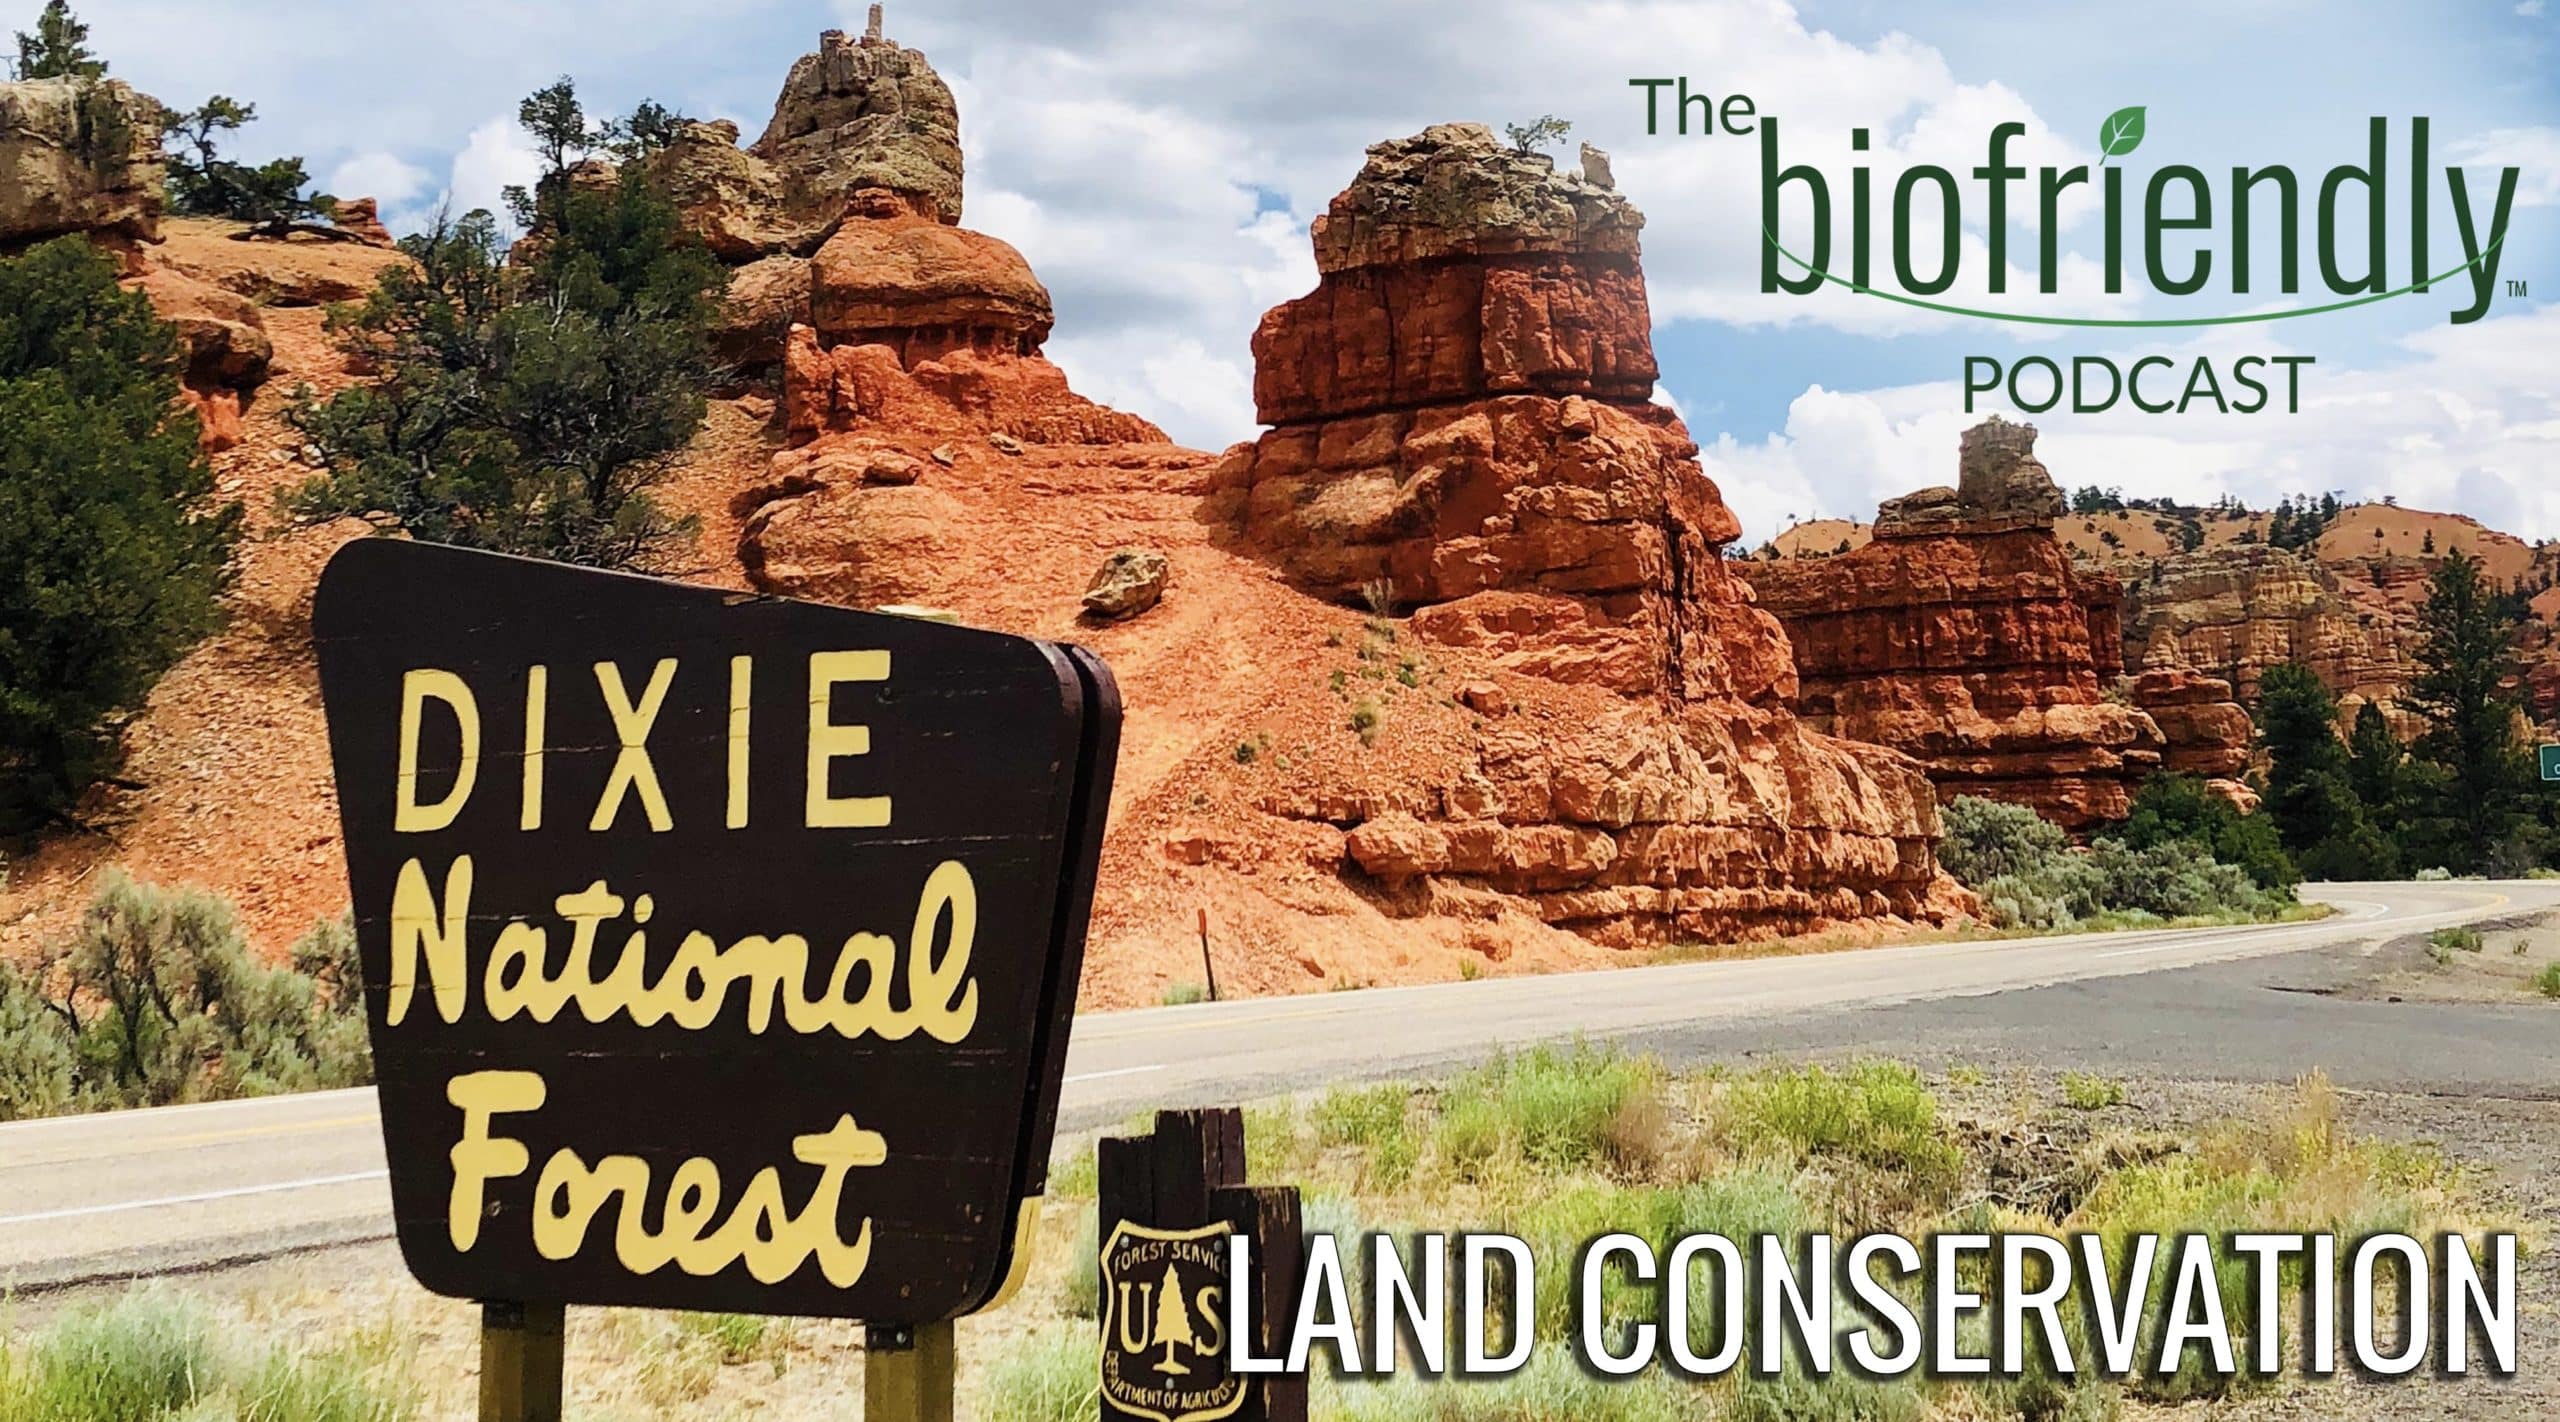 The Biofriendly Podcast - Episode 75 - Land Conservation